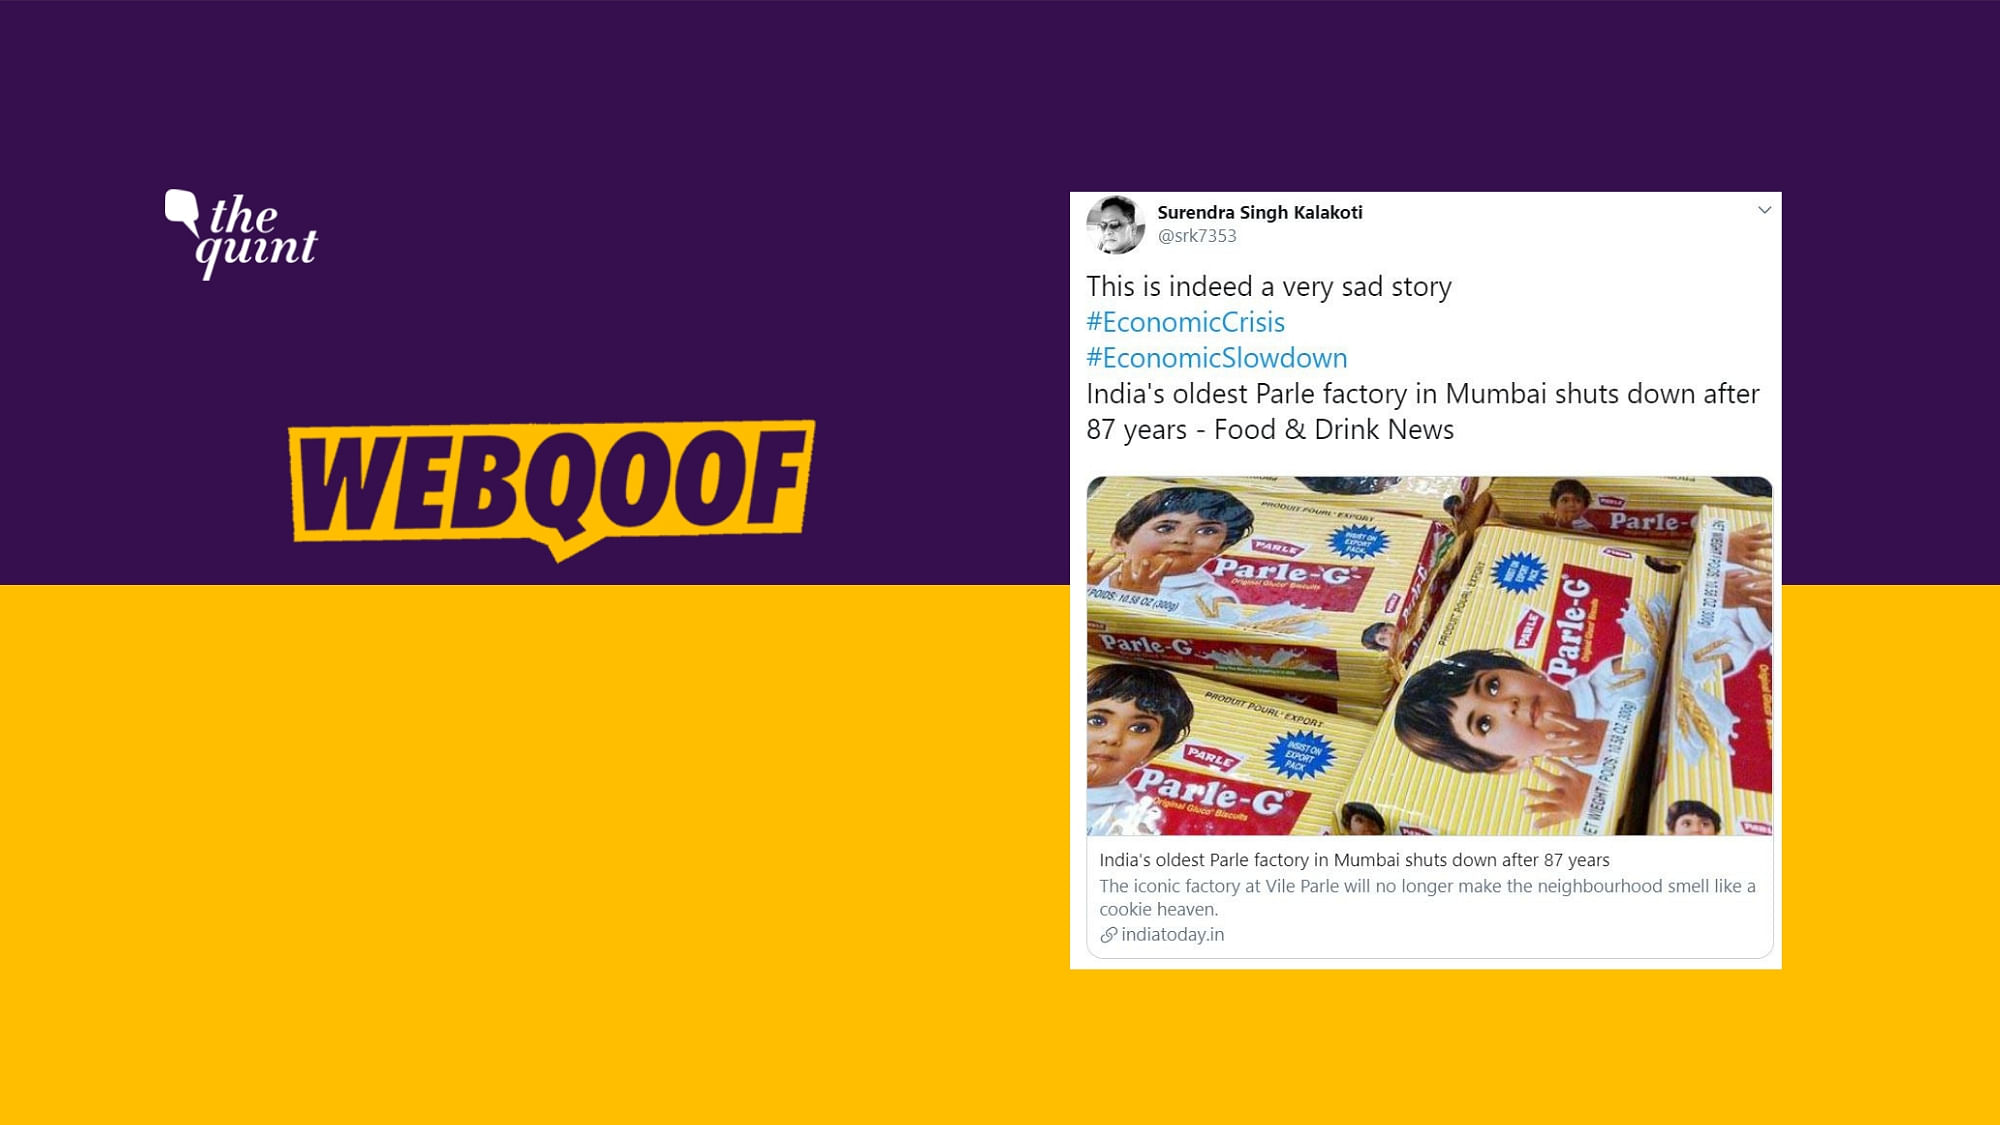 A post has been widely circulating on social media with the claim that ‘India’s oldest Parle factory in Mumbai shuts down after 87 years.’